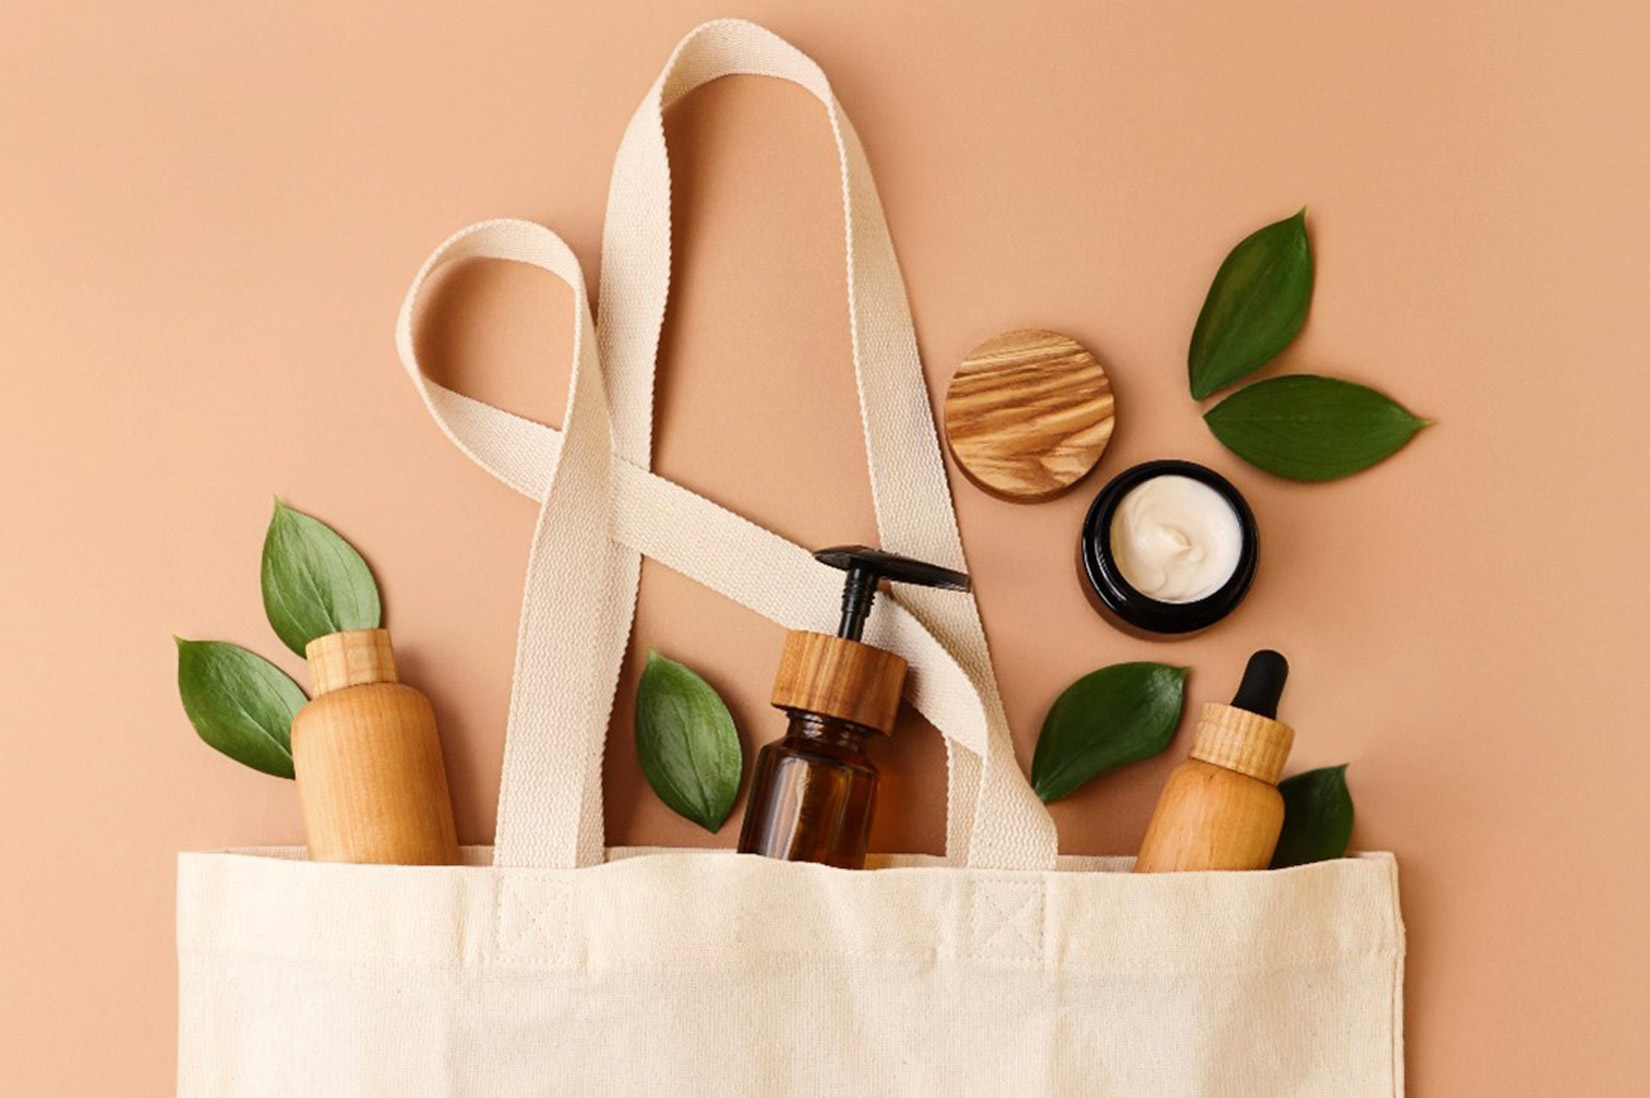 Eco-friendly Beauty Products in a Brown Tote Bag